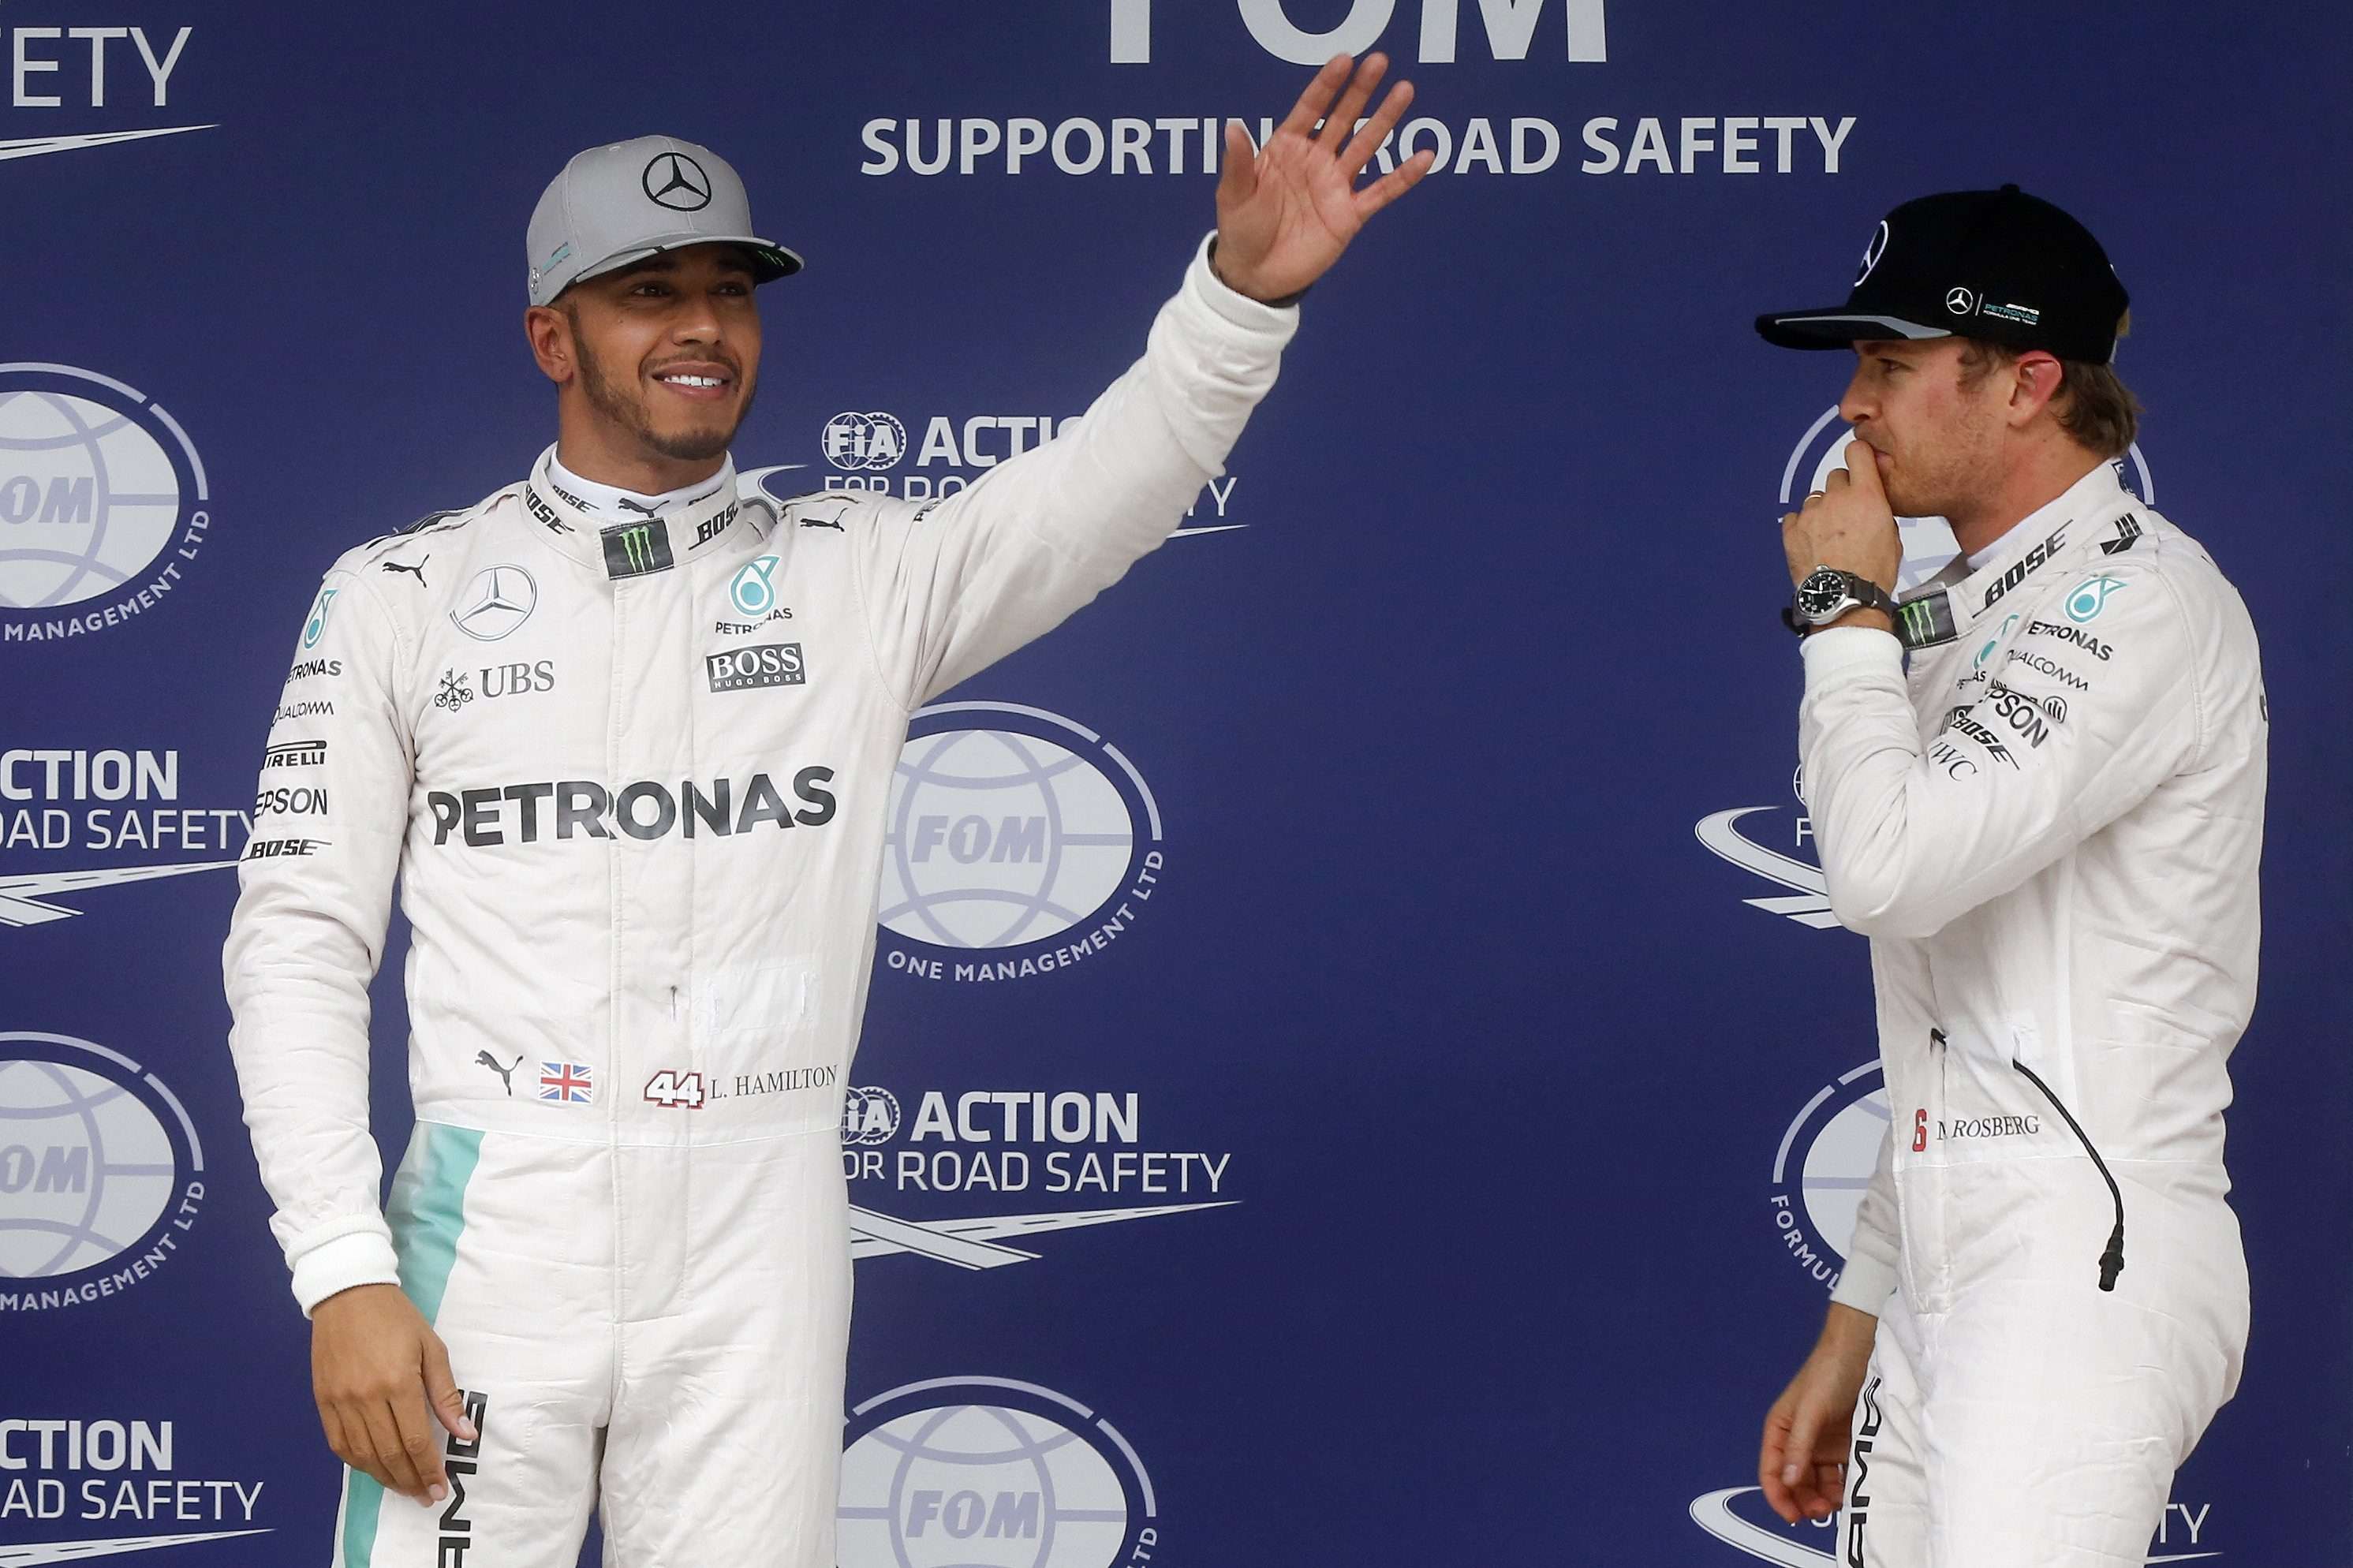 Britain’s Lewis Hamilton and German Nico Rosberg of Mercedes team on the podium after qualifying. Photo: EPA